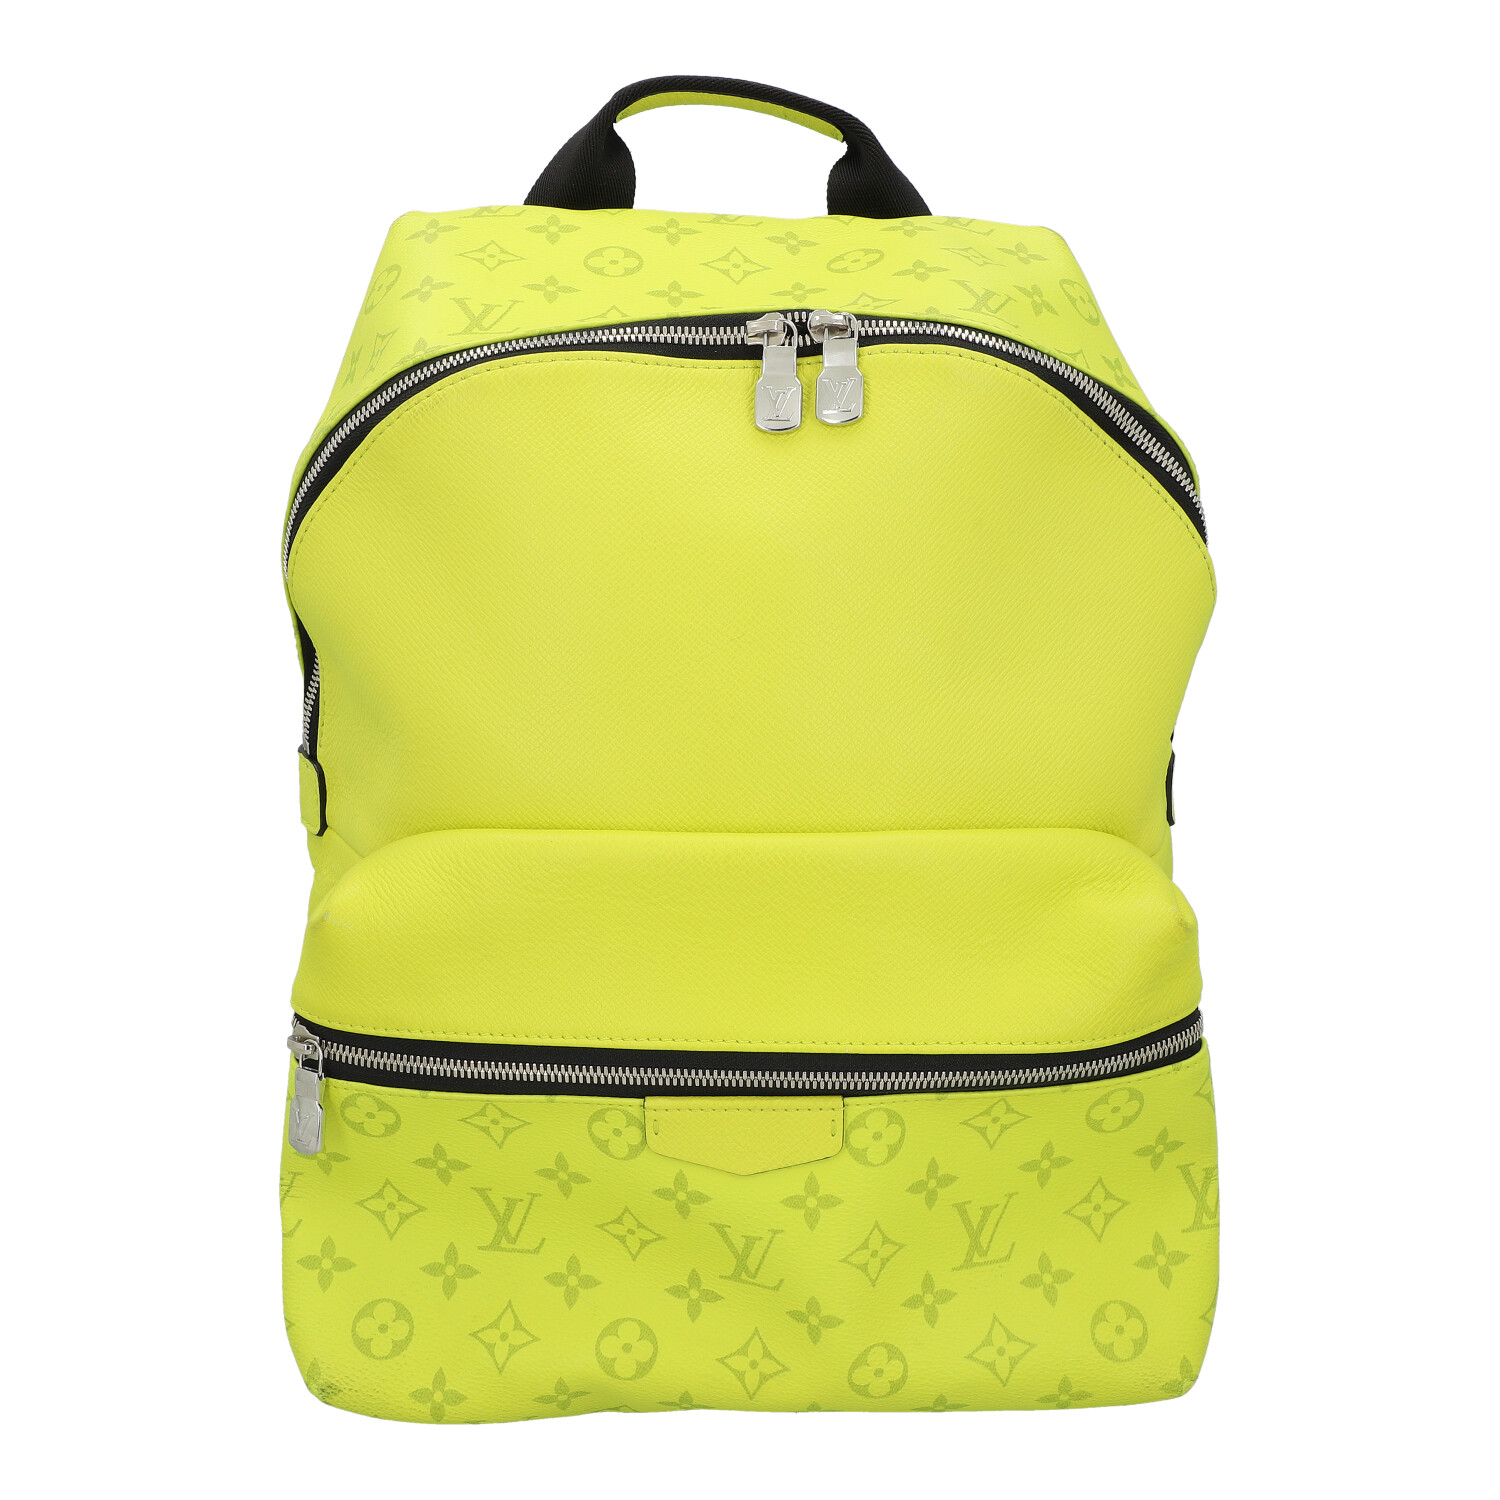 EPPLI, LOUIS VUITTON Backpack 'DISCOVERY'.